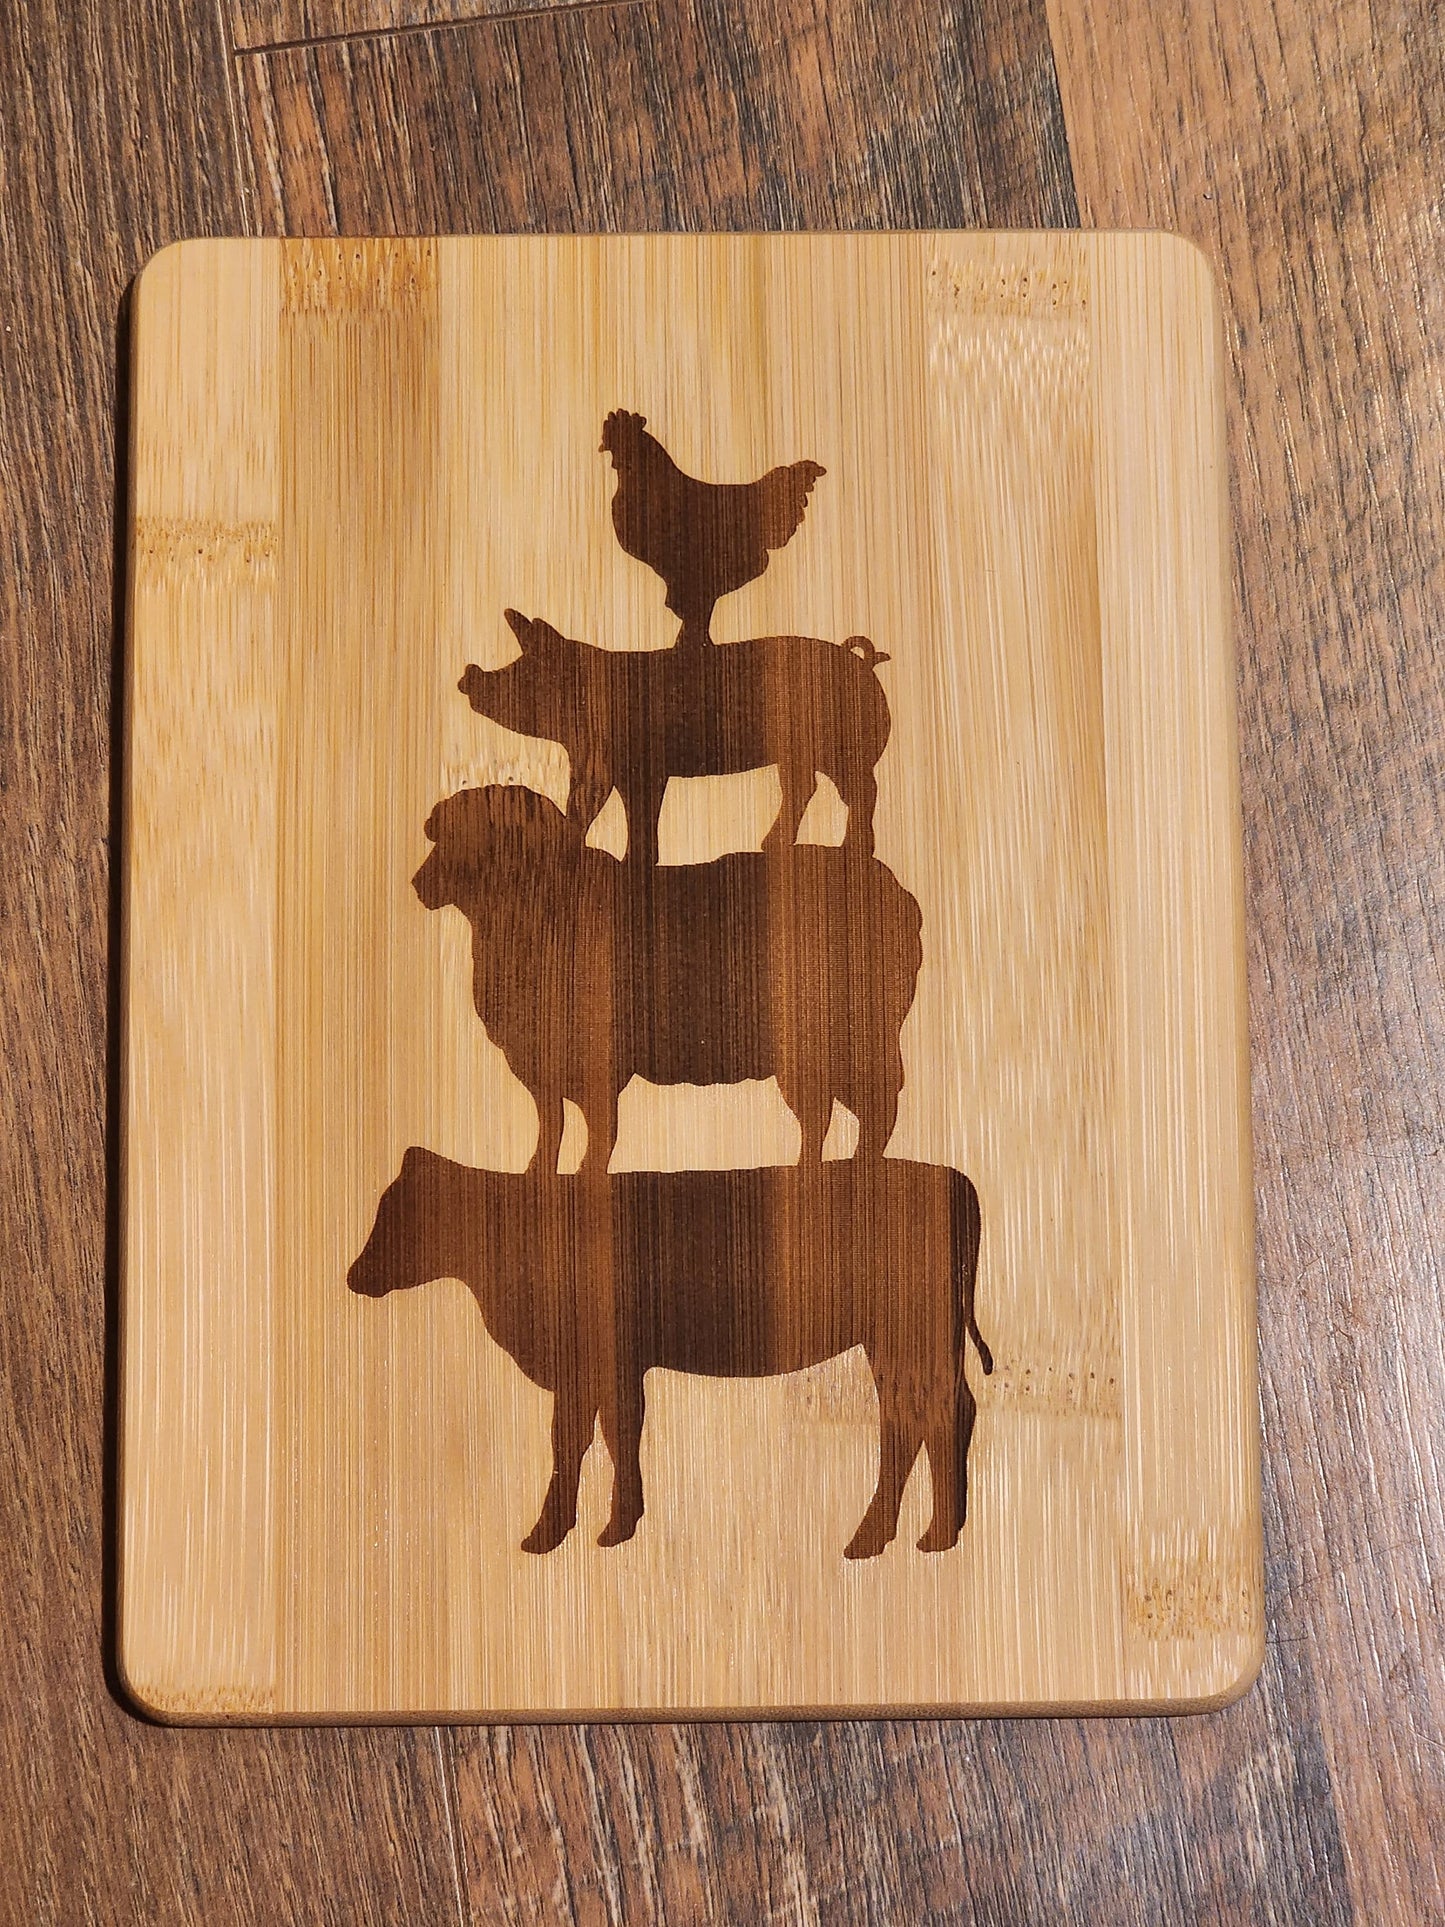 Stacked Farm Animals, Chicken, Pig, Lamb, Cow, western, country etched Bamboo Wood Cutting Board  - 8.75 x 6.875 inches